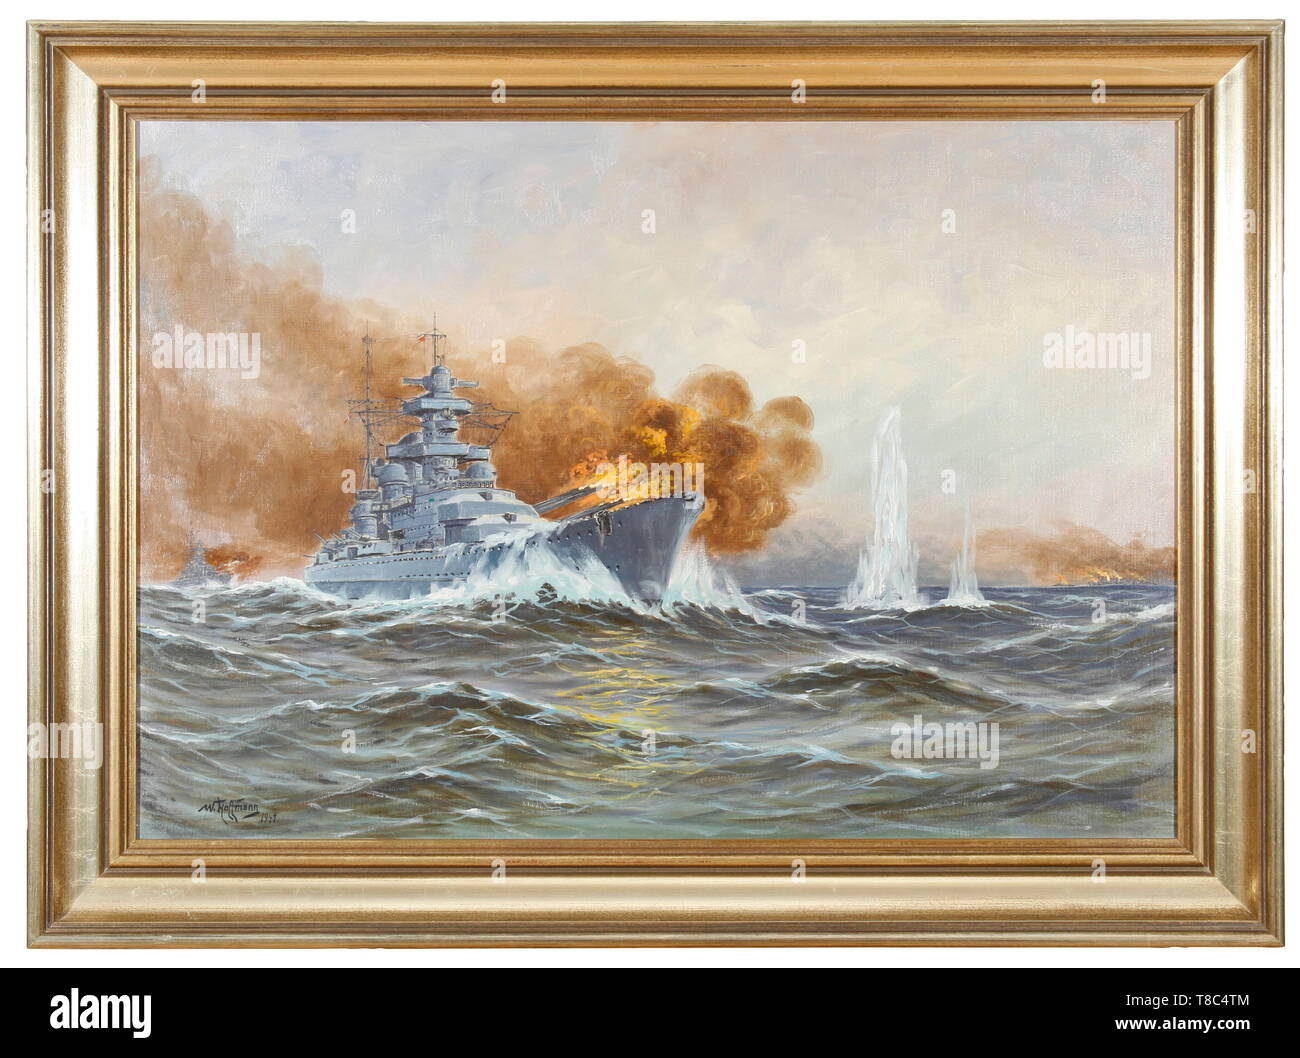 An oil painting of Battleship Scharnhorst in combat Artist Wilhelm Hoffmann (1897 - 1986), oil on canvas, signed on the lower left and dated 1941. Size of picture circa 100 x 70 cm, size of frame circa 117 x 87 cm. Depiction of the battle from 8 June 1940 'Operation Juno', in which the battleships Scharnhorst and Gneisenau sank the British aircraft carrier 'HMS Glorious' and the two accompanying destroyers 'HMS Ardent and Acasta' near Harstad, North Norway. The Scharnhorst was put into service in 1939 and took part in several operations during the Second World War. The ship, Editorial-Use-Only Stock Photo